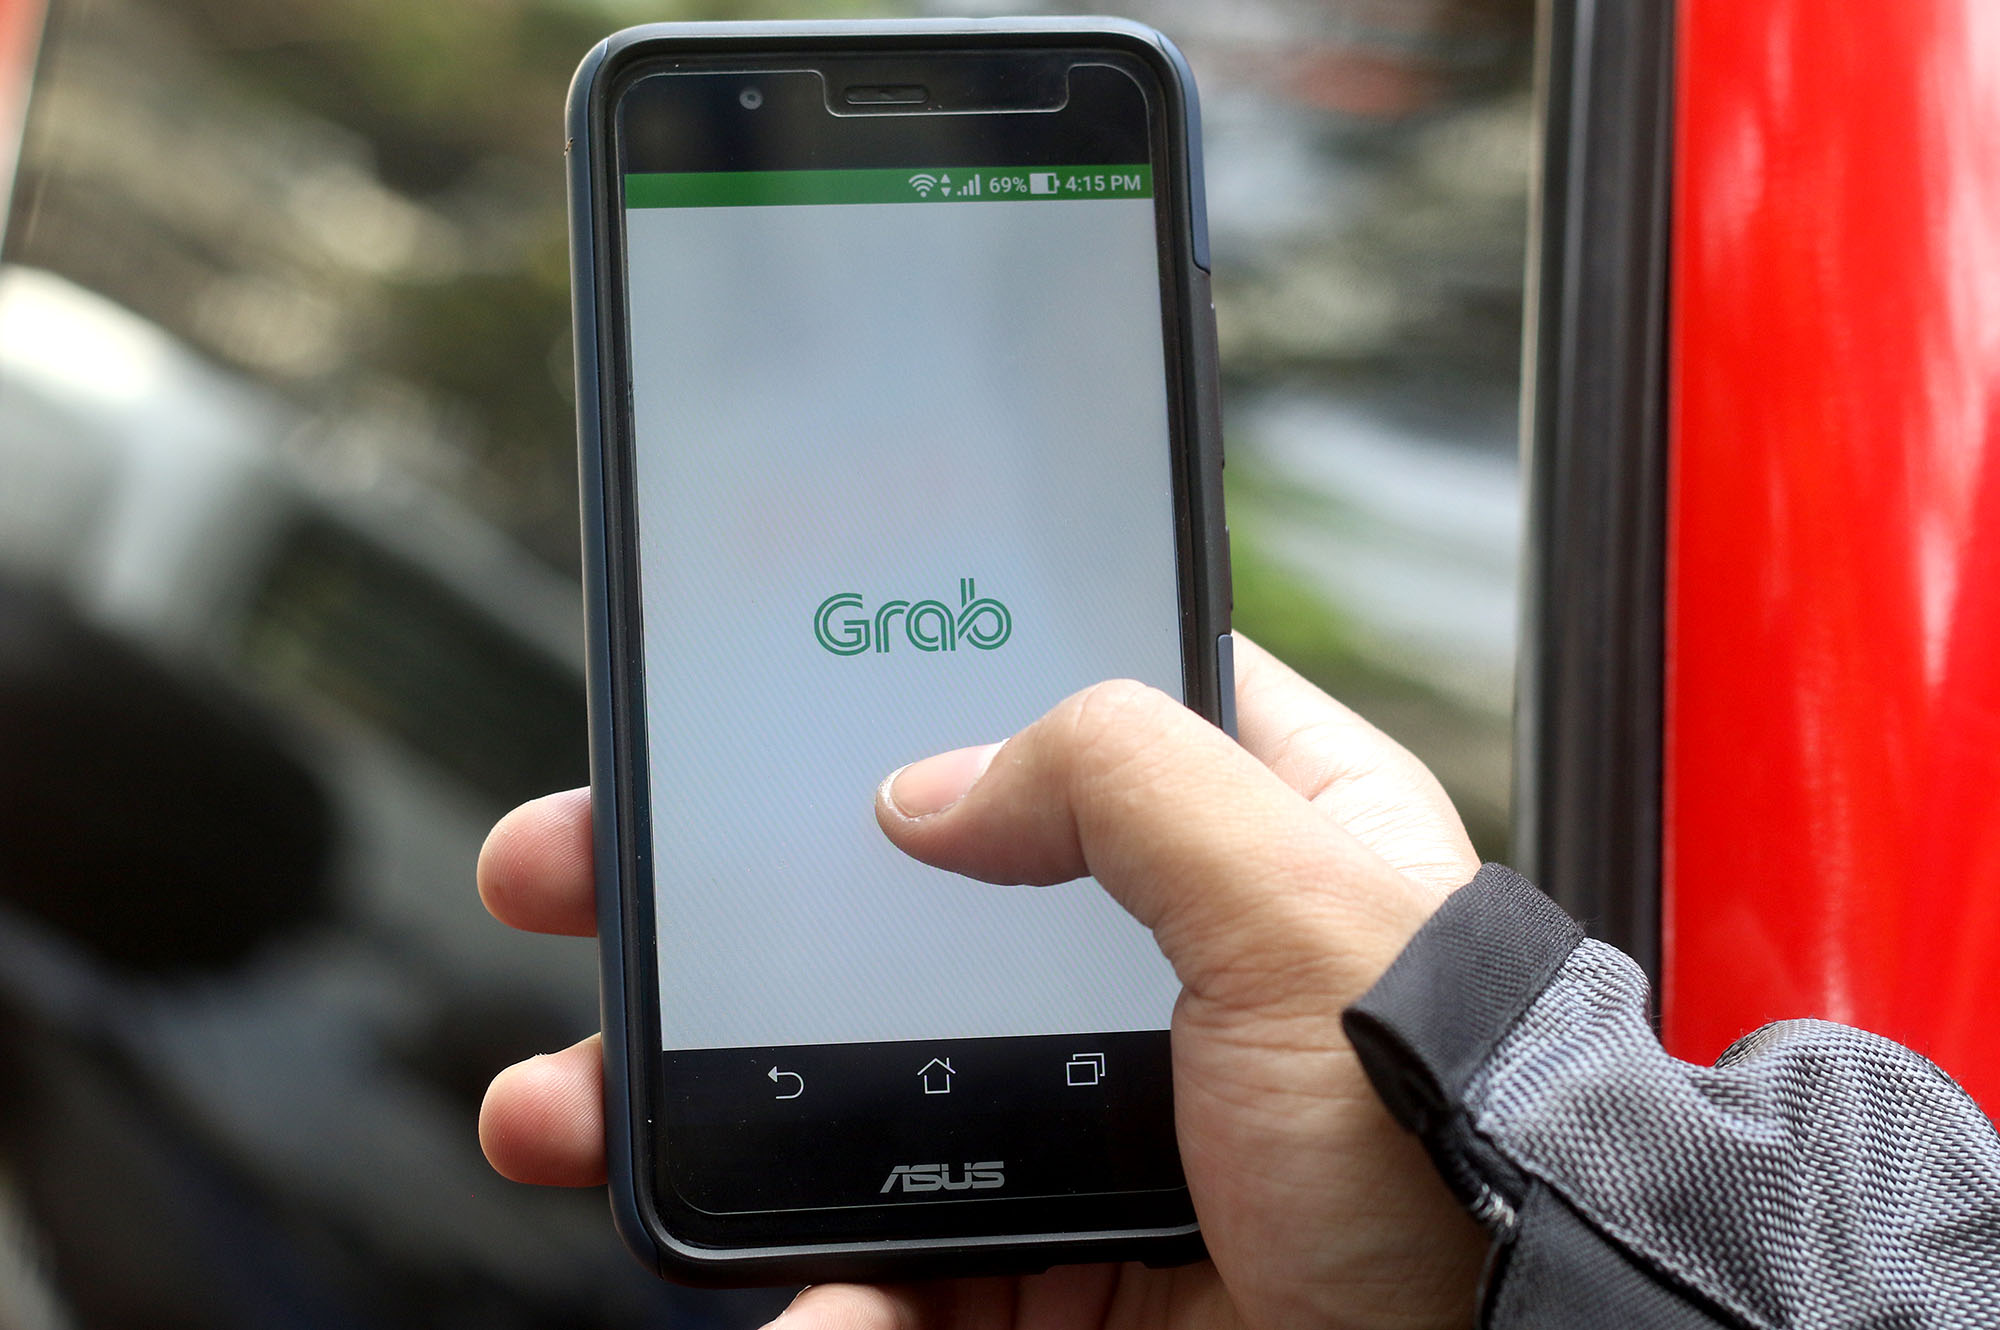 PCC says Grab gave incorrect data about its pricing